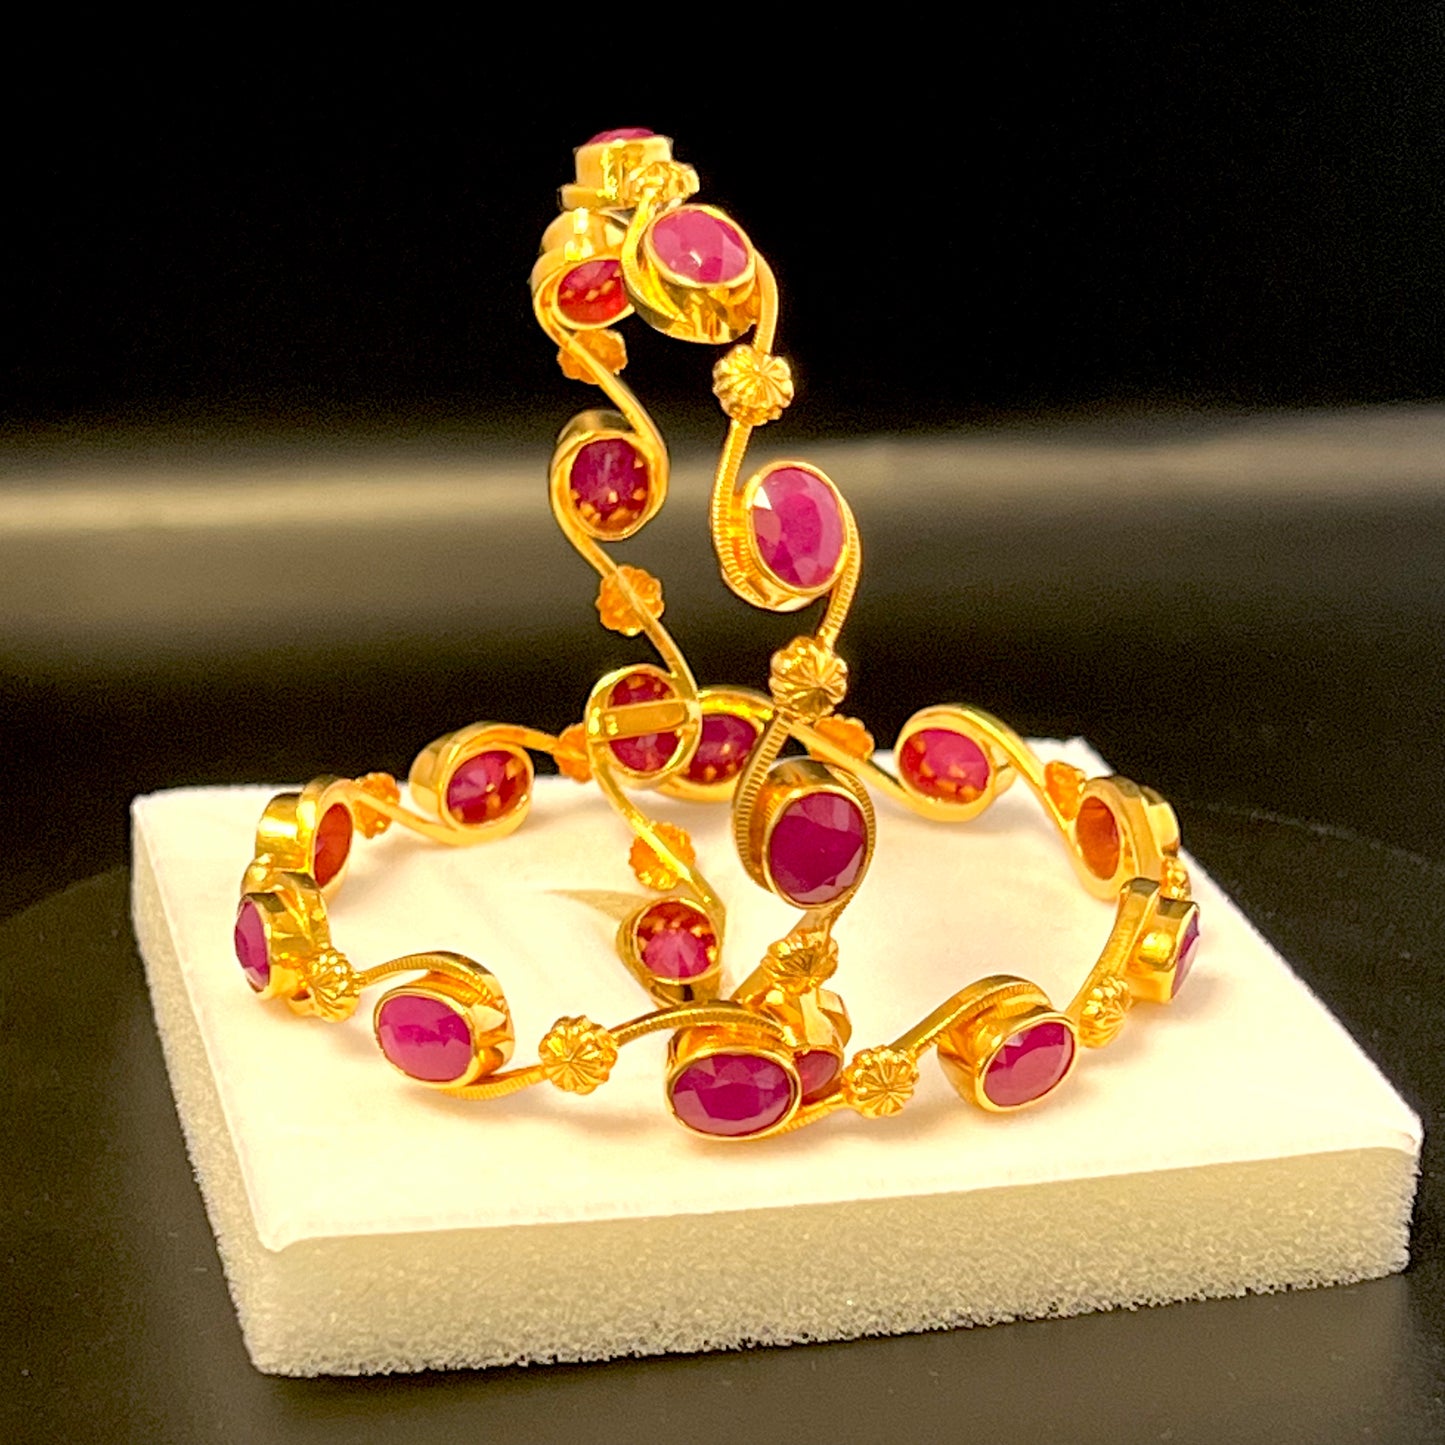 Glamorous Ruby Bangles with Curvy Golden Strings